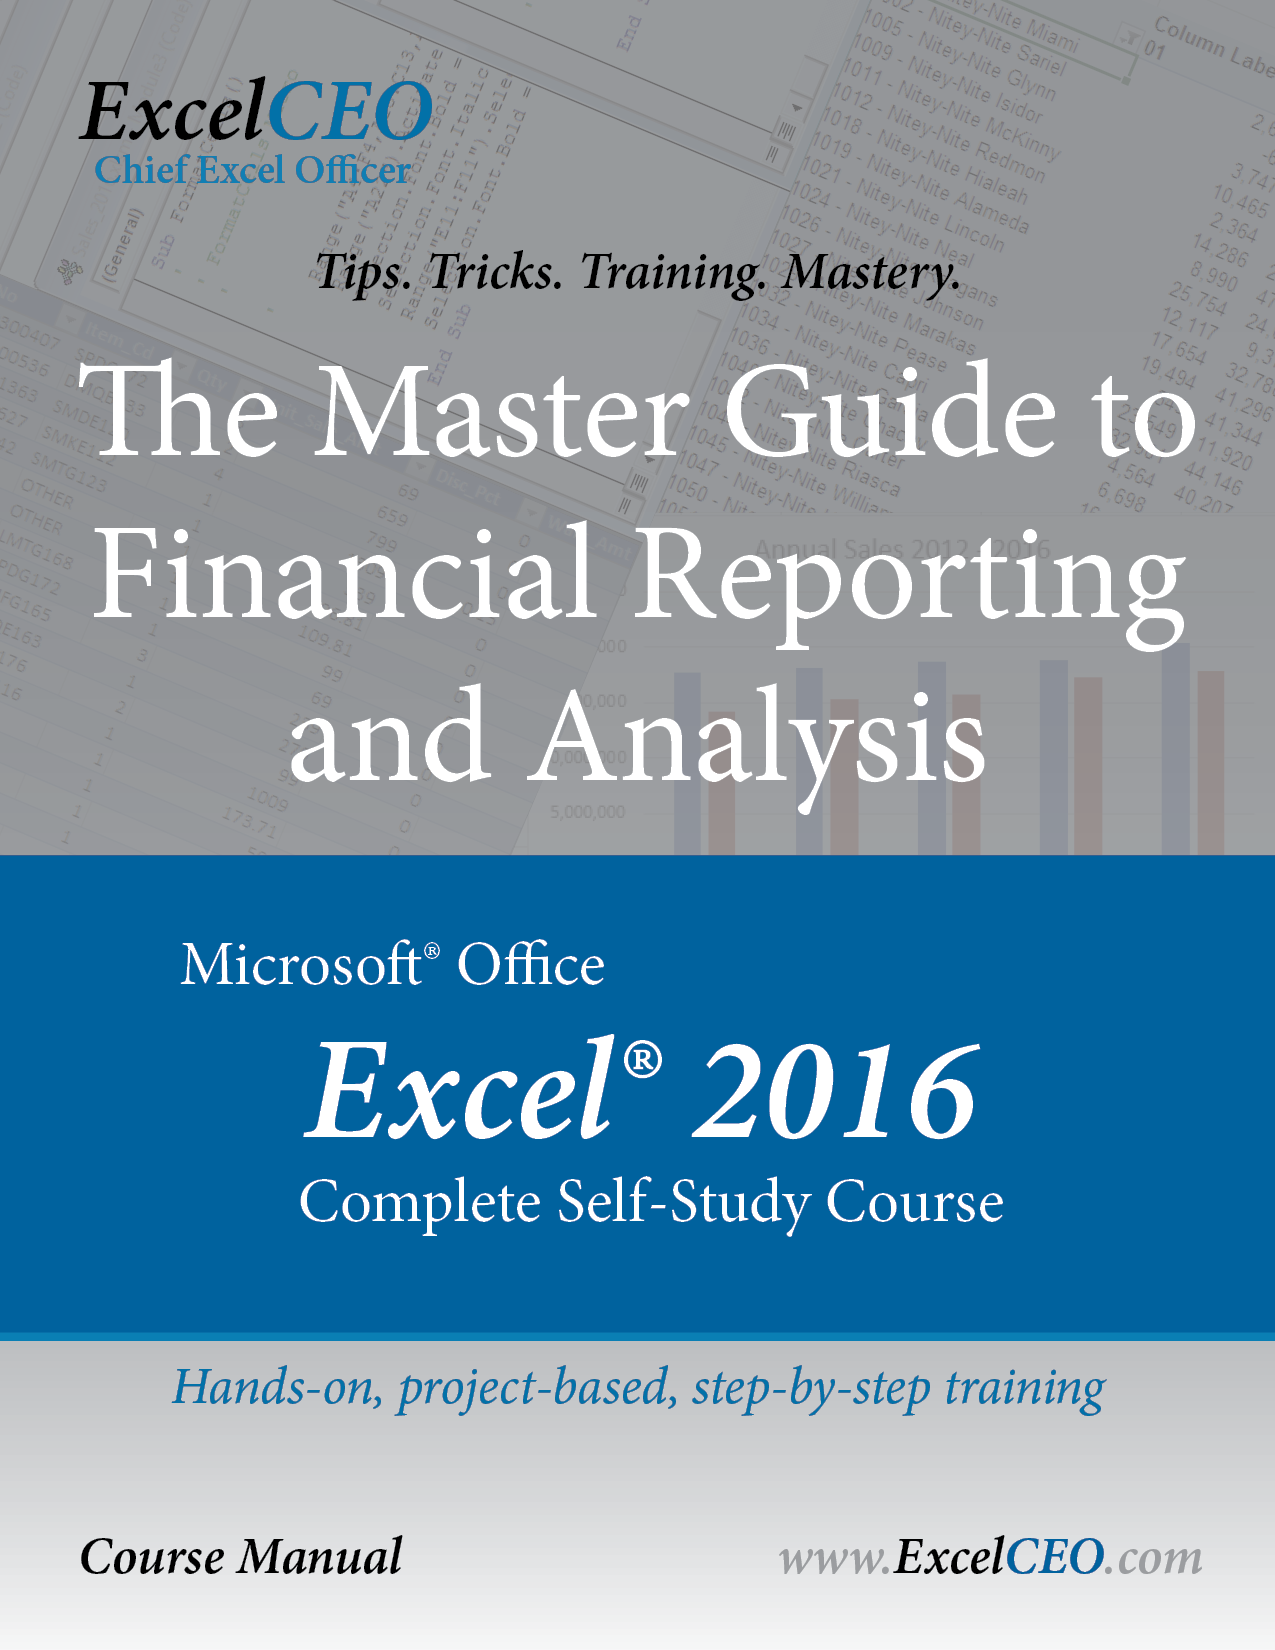 Excel 2016 Manual Cover and Product Page Link